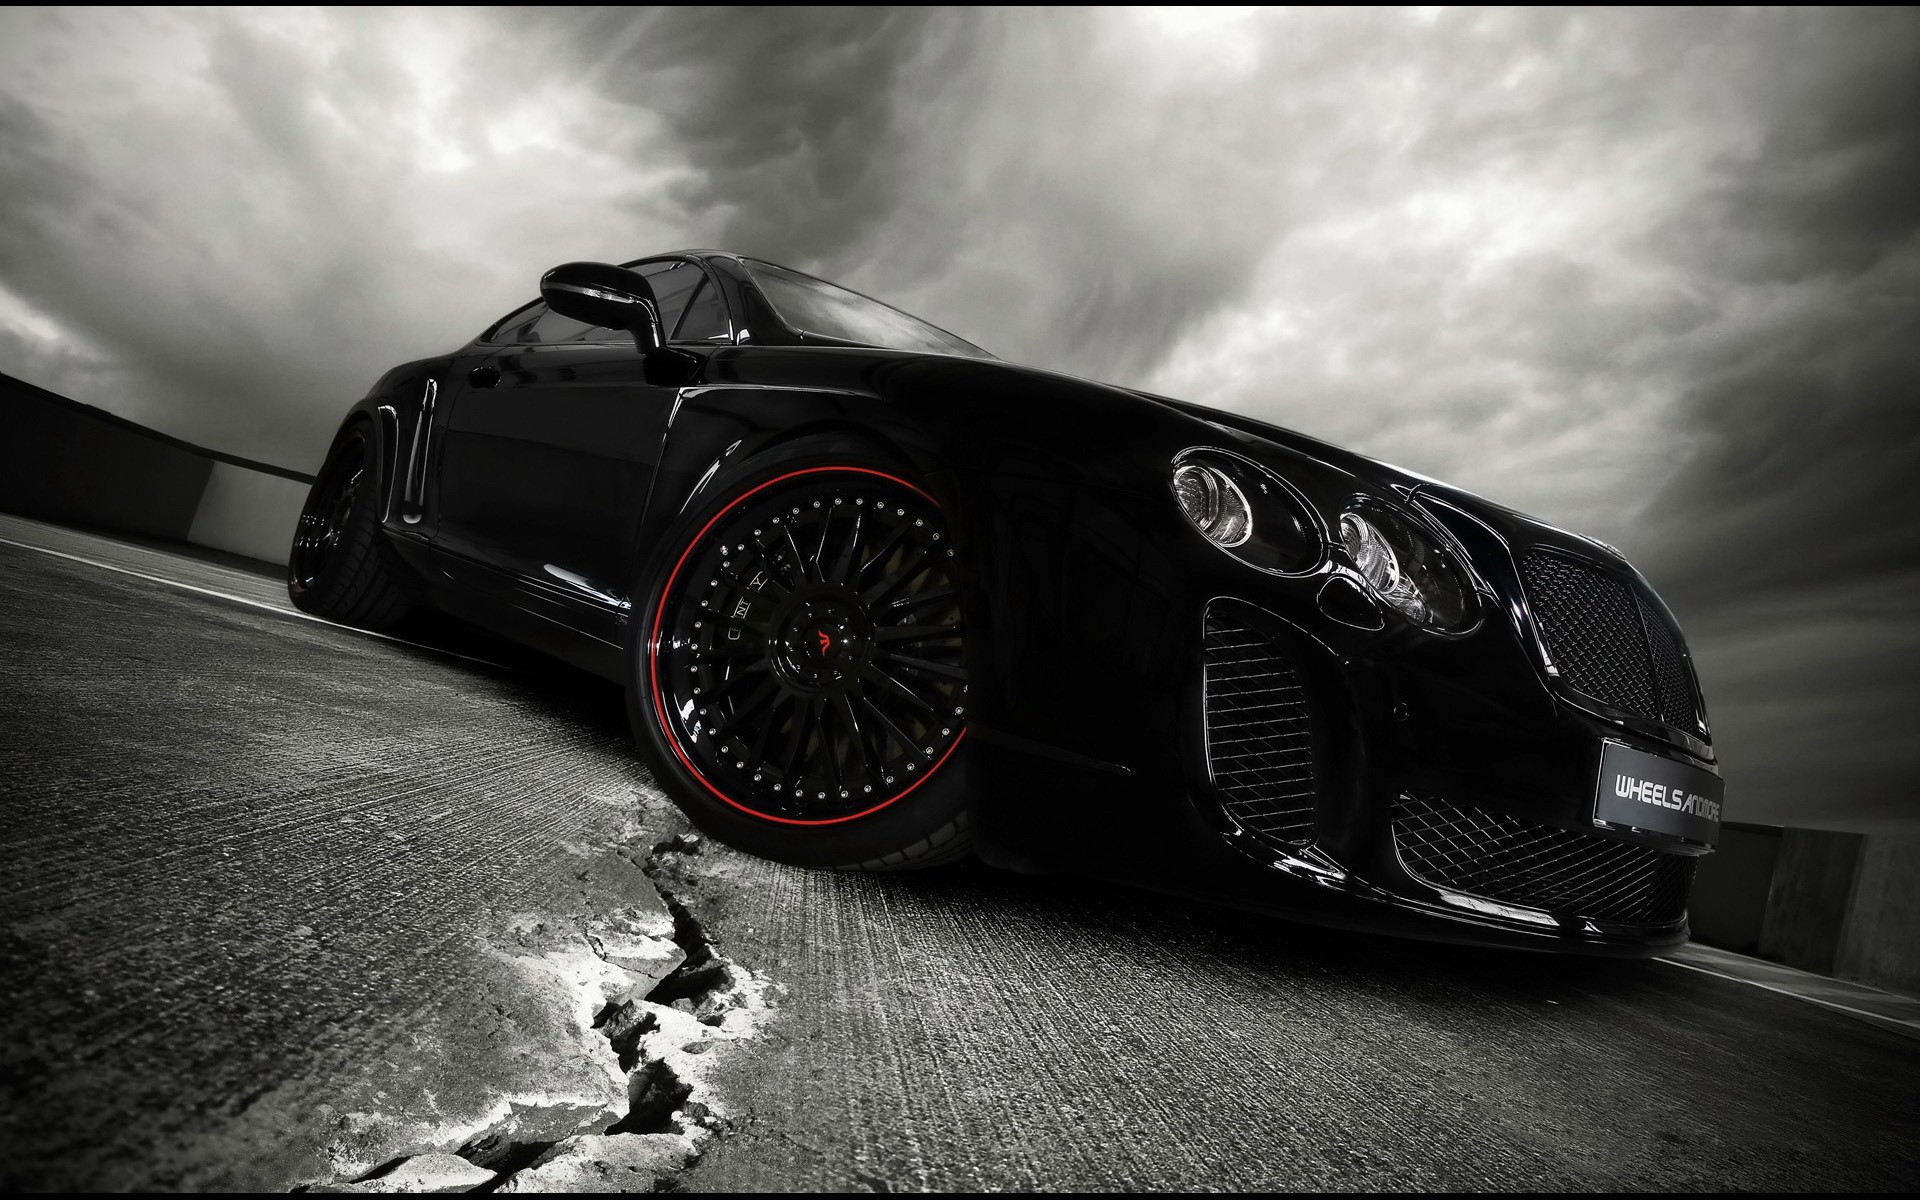 The Red And Black Bentley Wallpaper